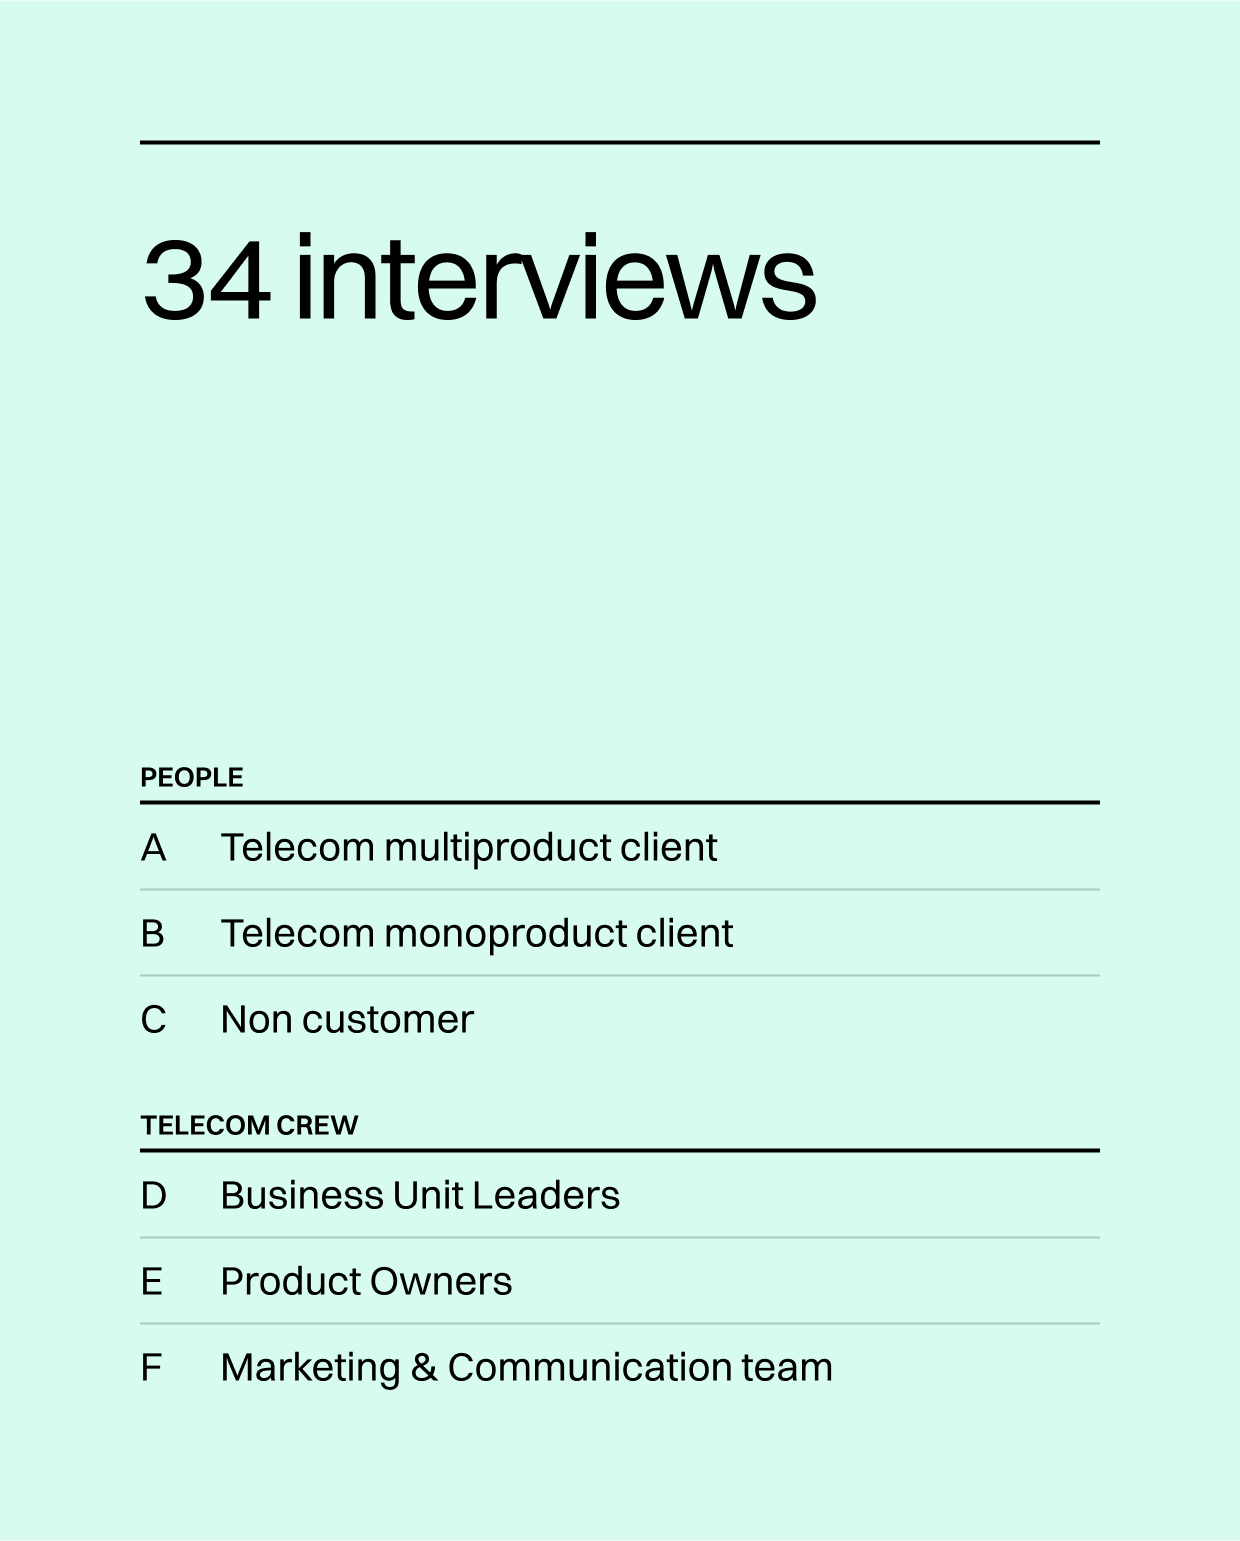 We did 34 interviews Telecom multiproduct clients, Telecom monoproduct clients and Non Customers as well as people from Telecom Crew as Business Unit Leaders, Product Owners and Marketing & Communication team.